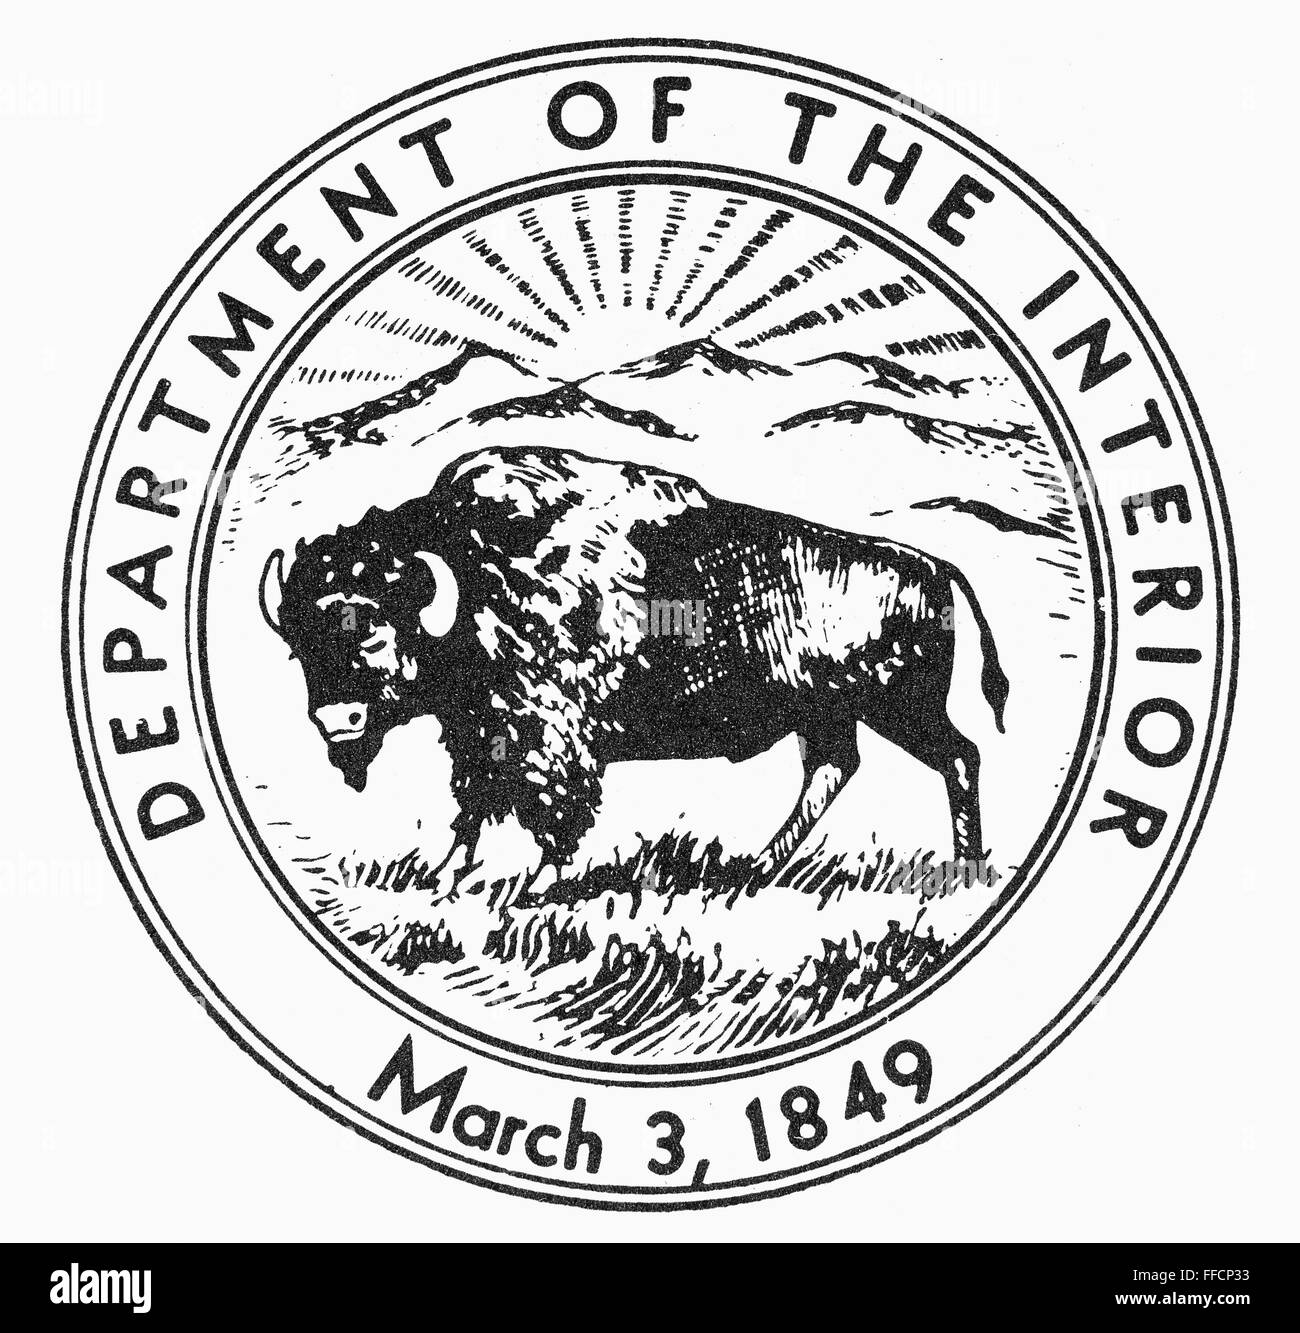 Department Of The Interior Nseal Of The U S Department Of